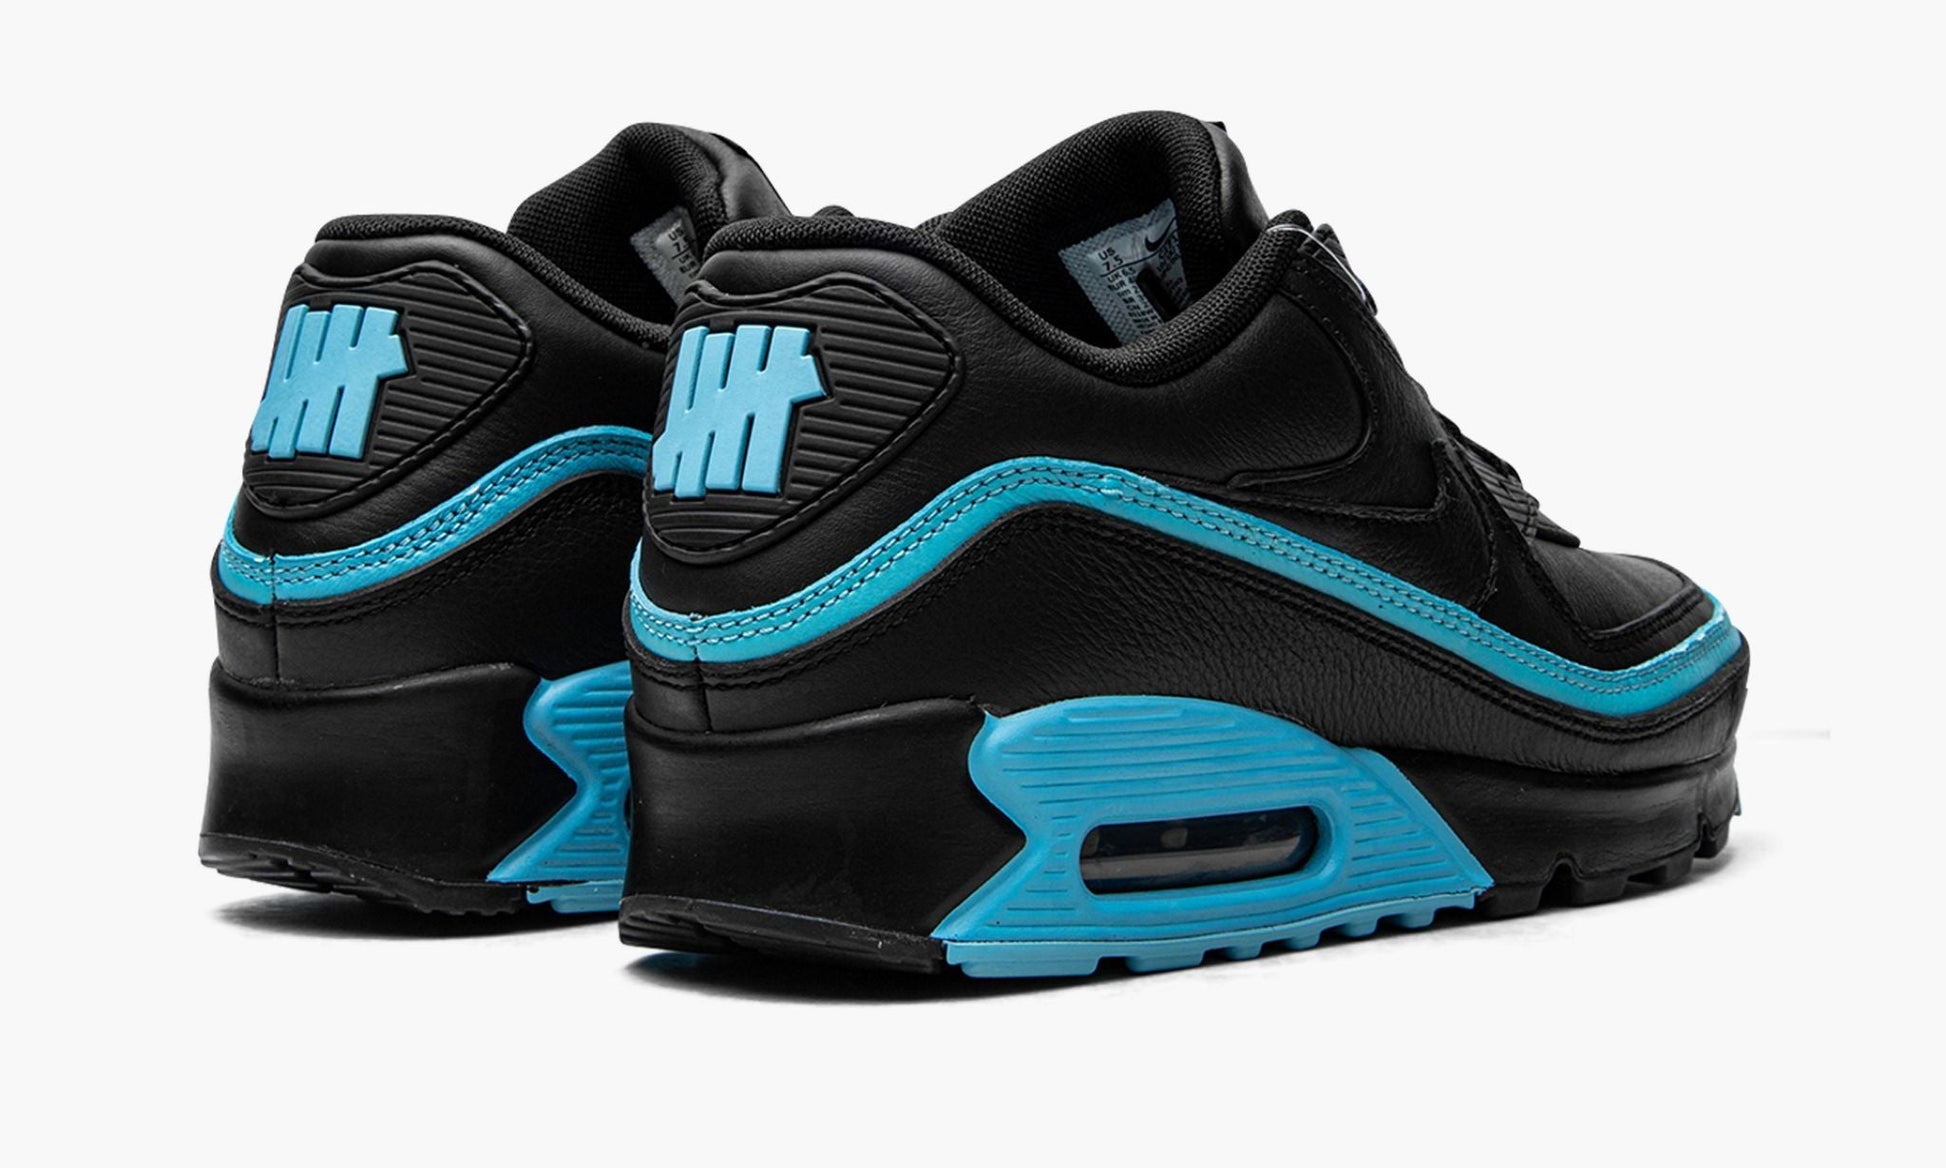 Air Max 90 / UNDFTD "Undefeated Black/Blue Fury"